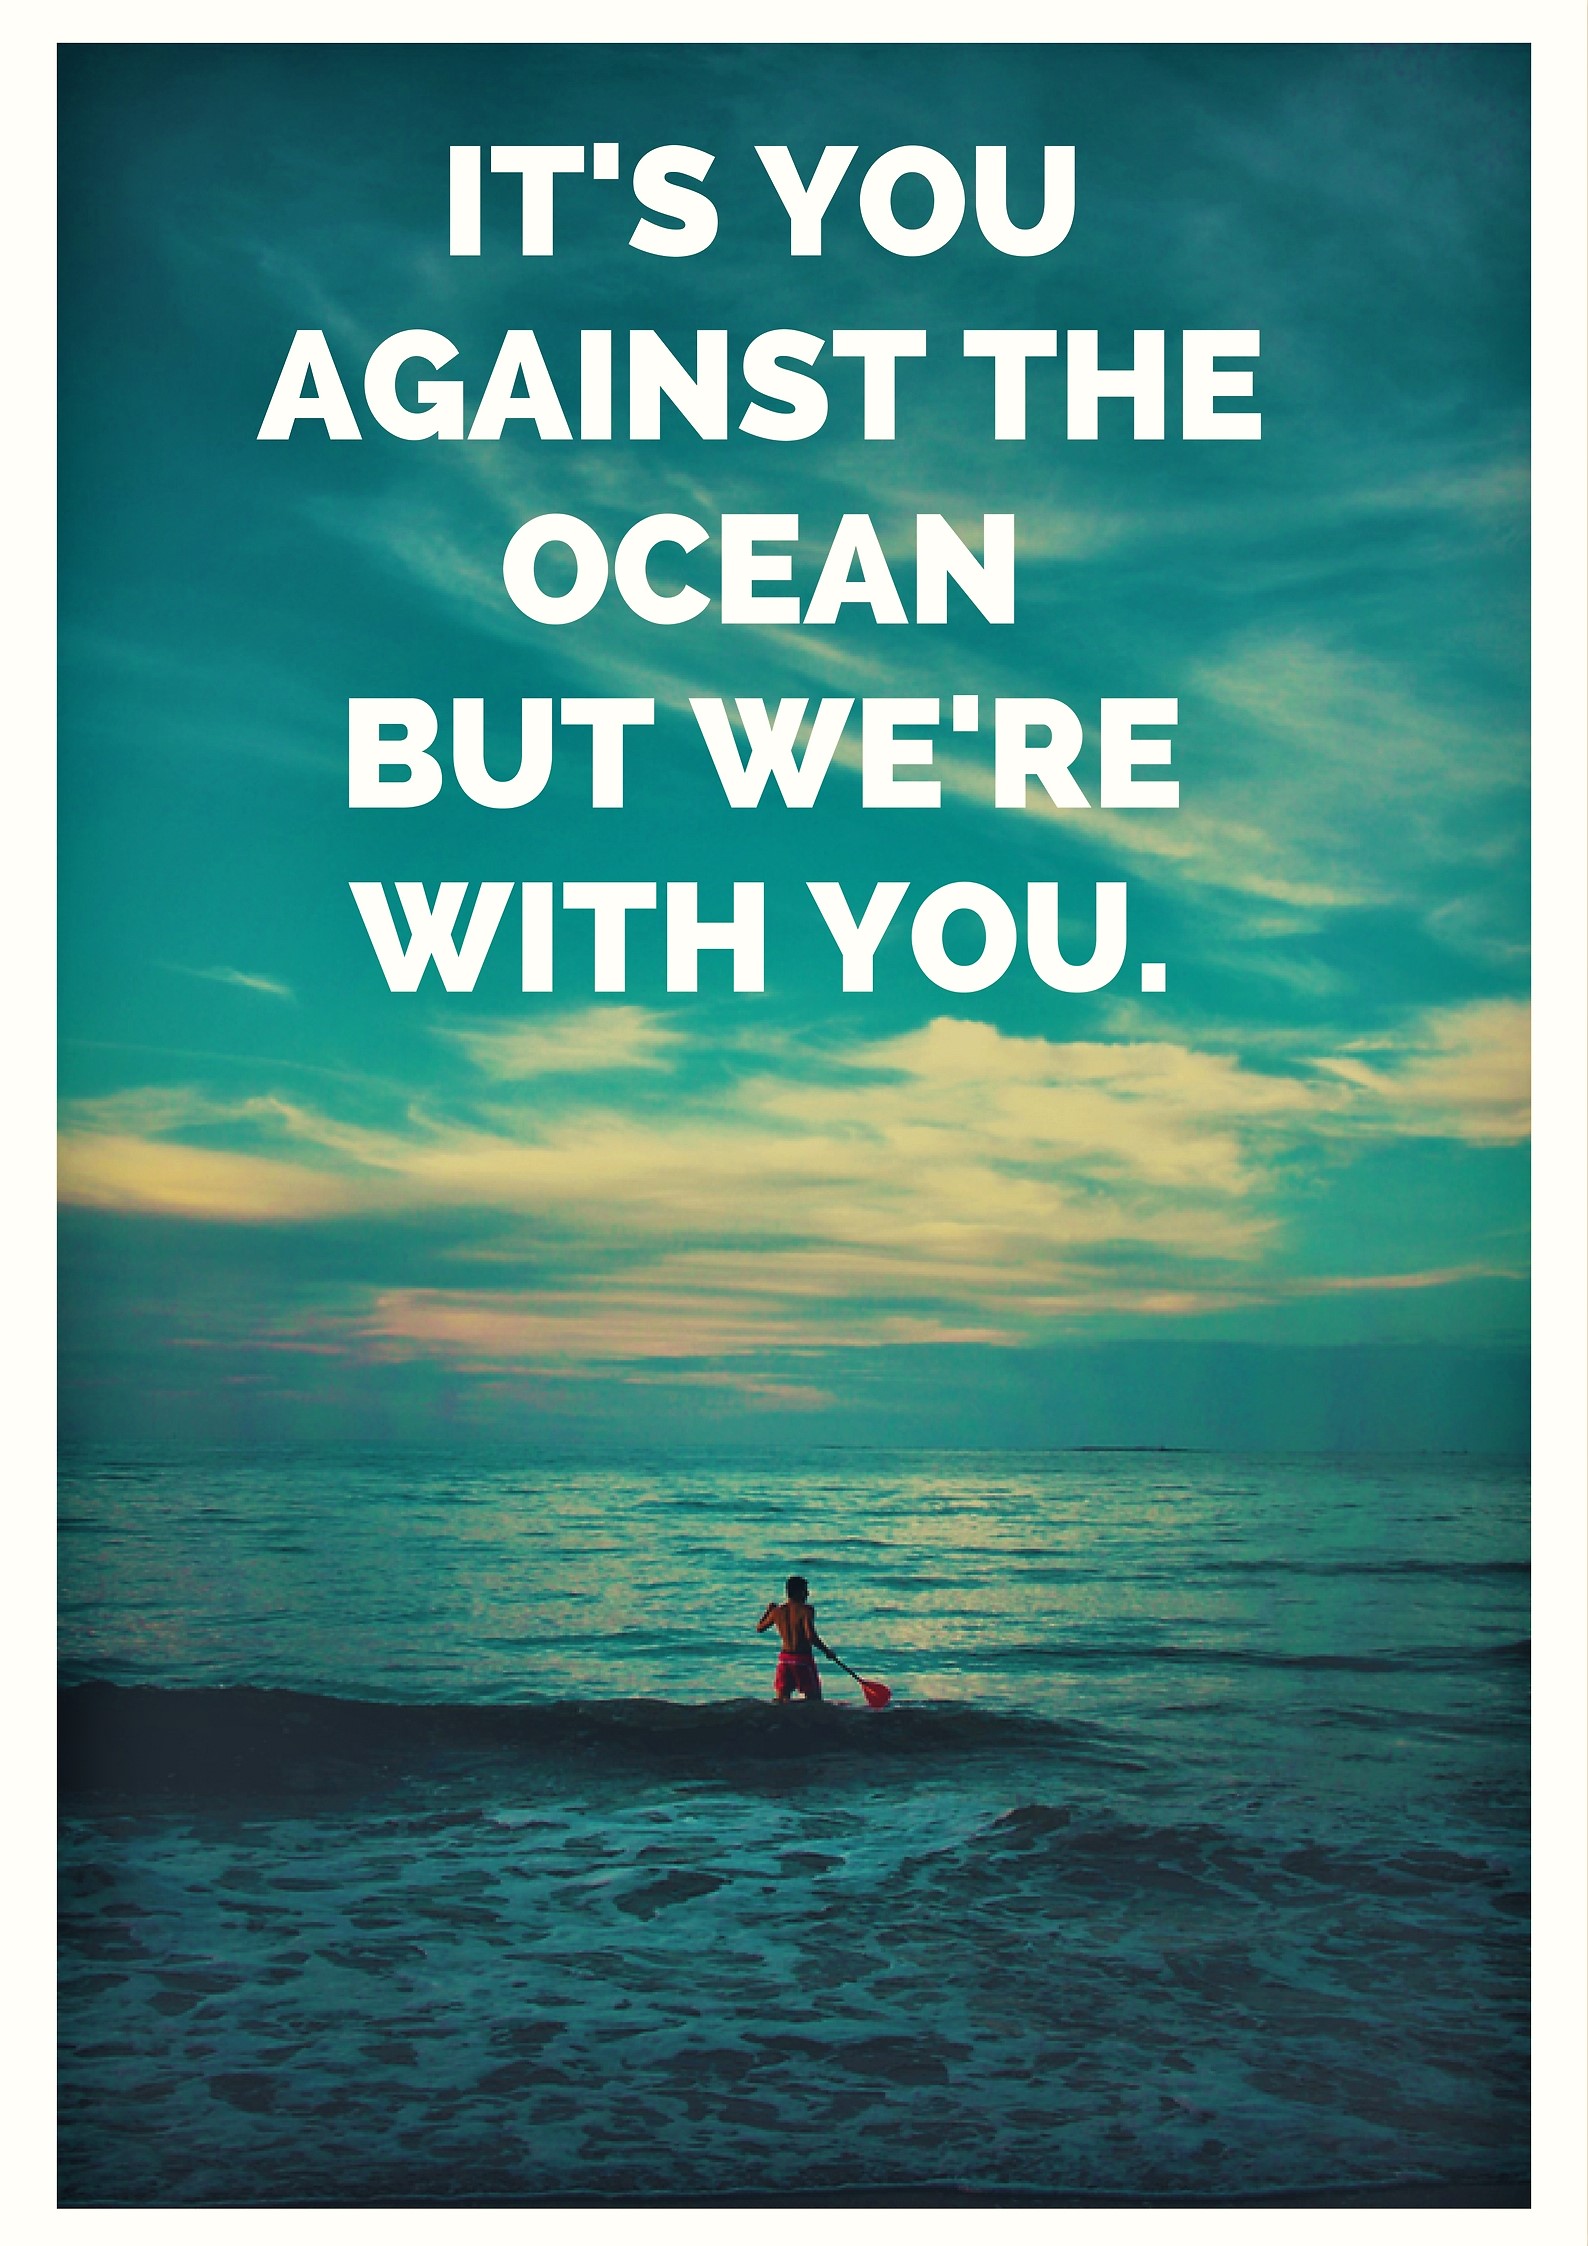 It's you against the ocean